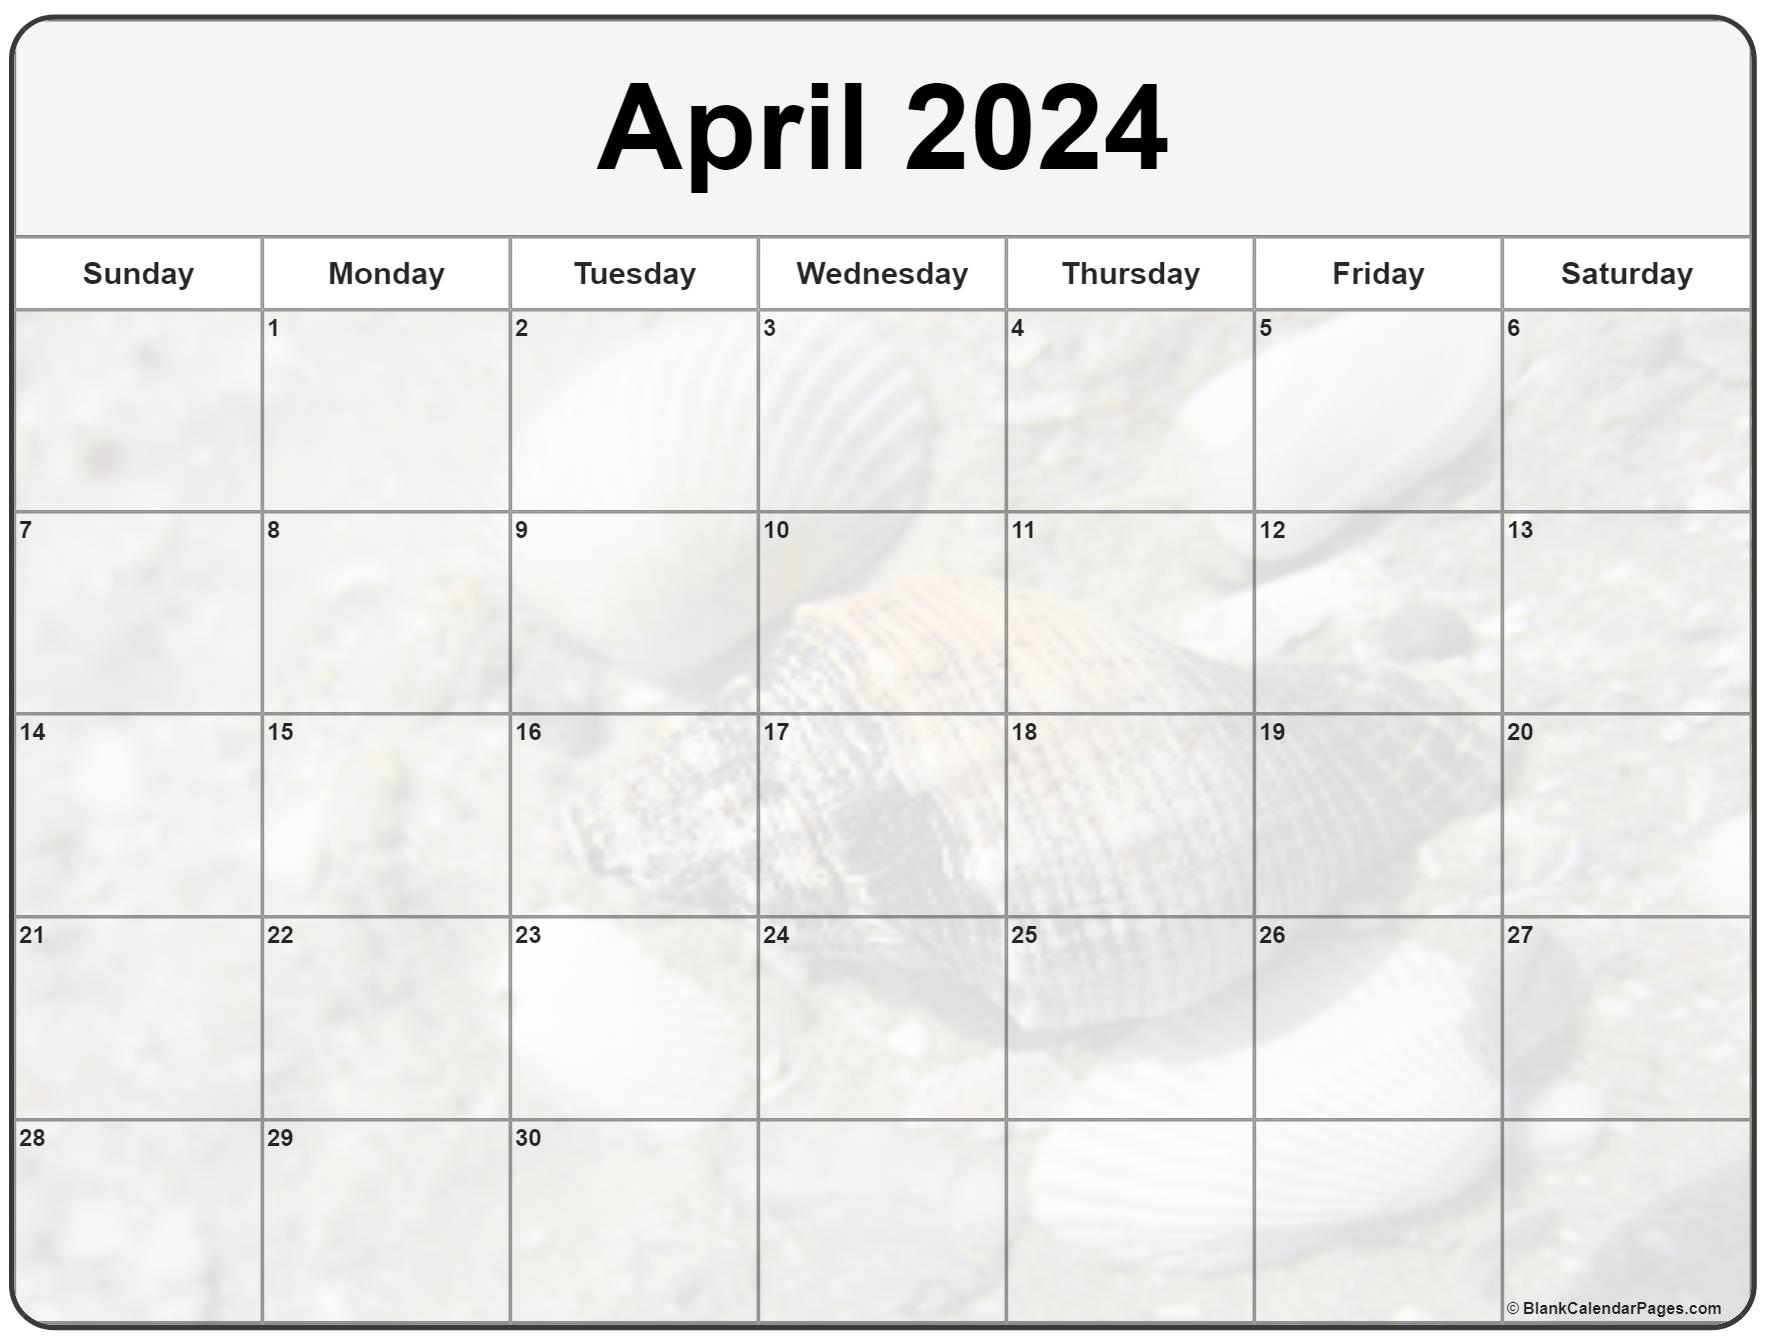 Collection Of April 2023 Photo Calendars With Image Filters.